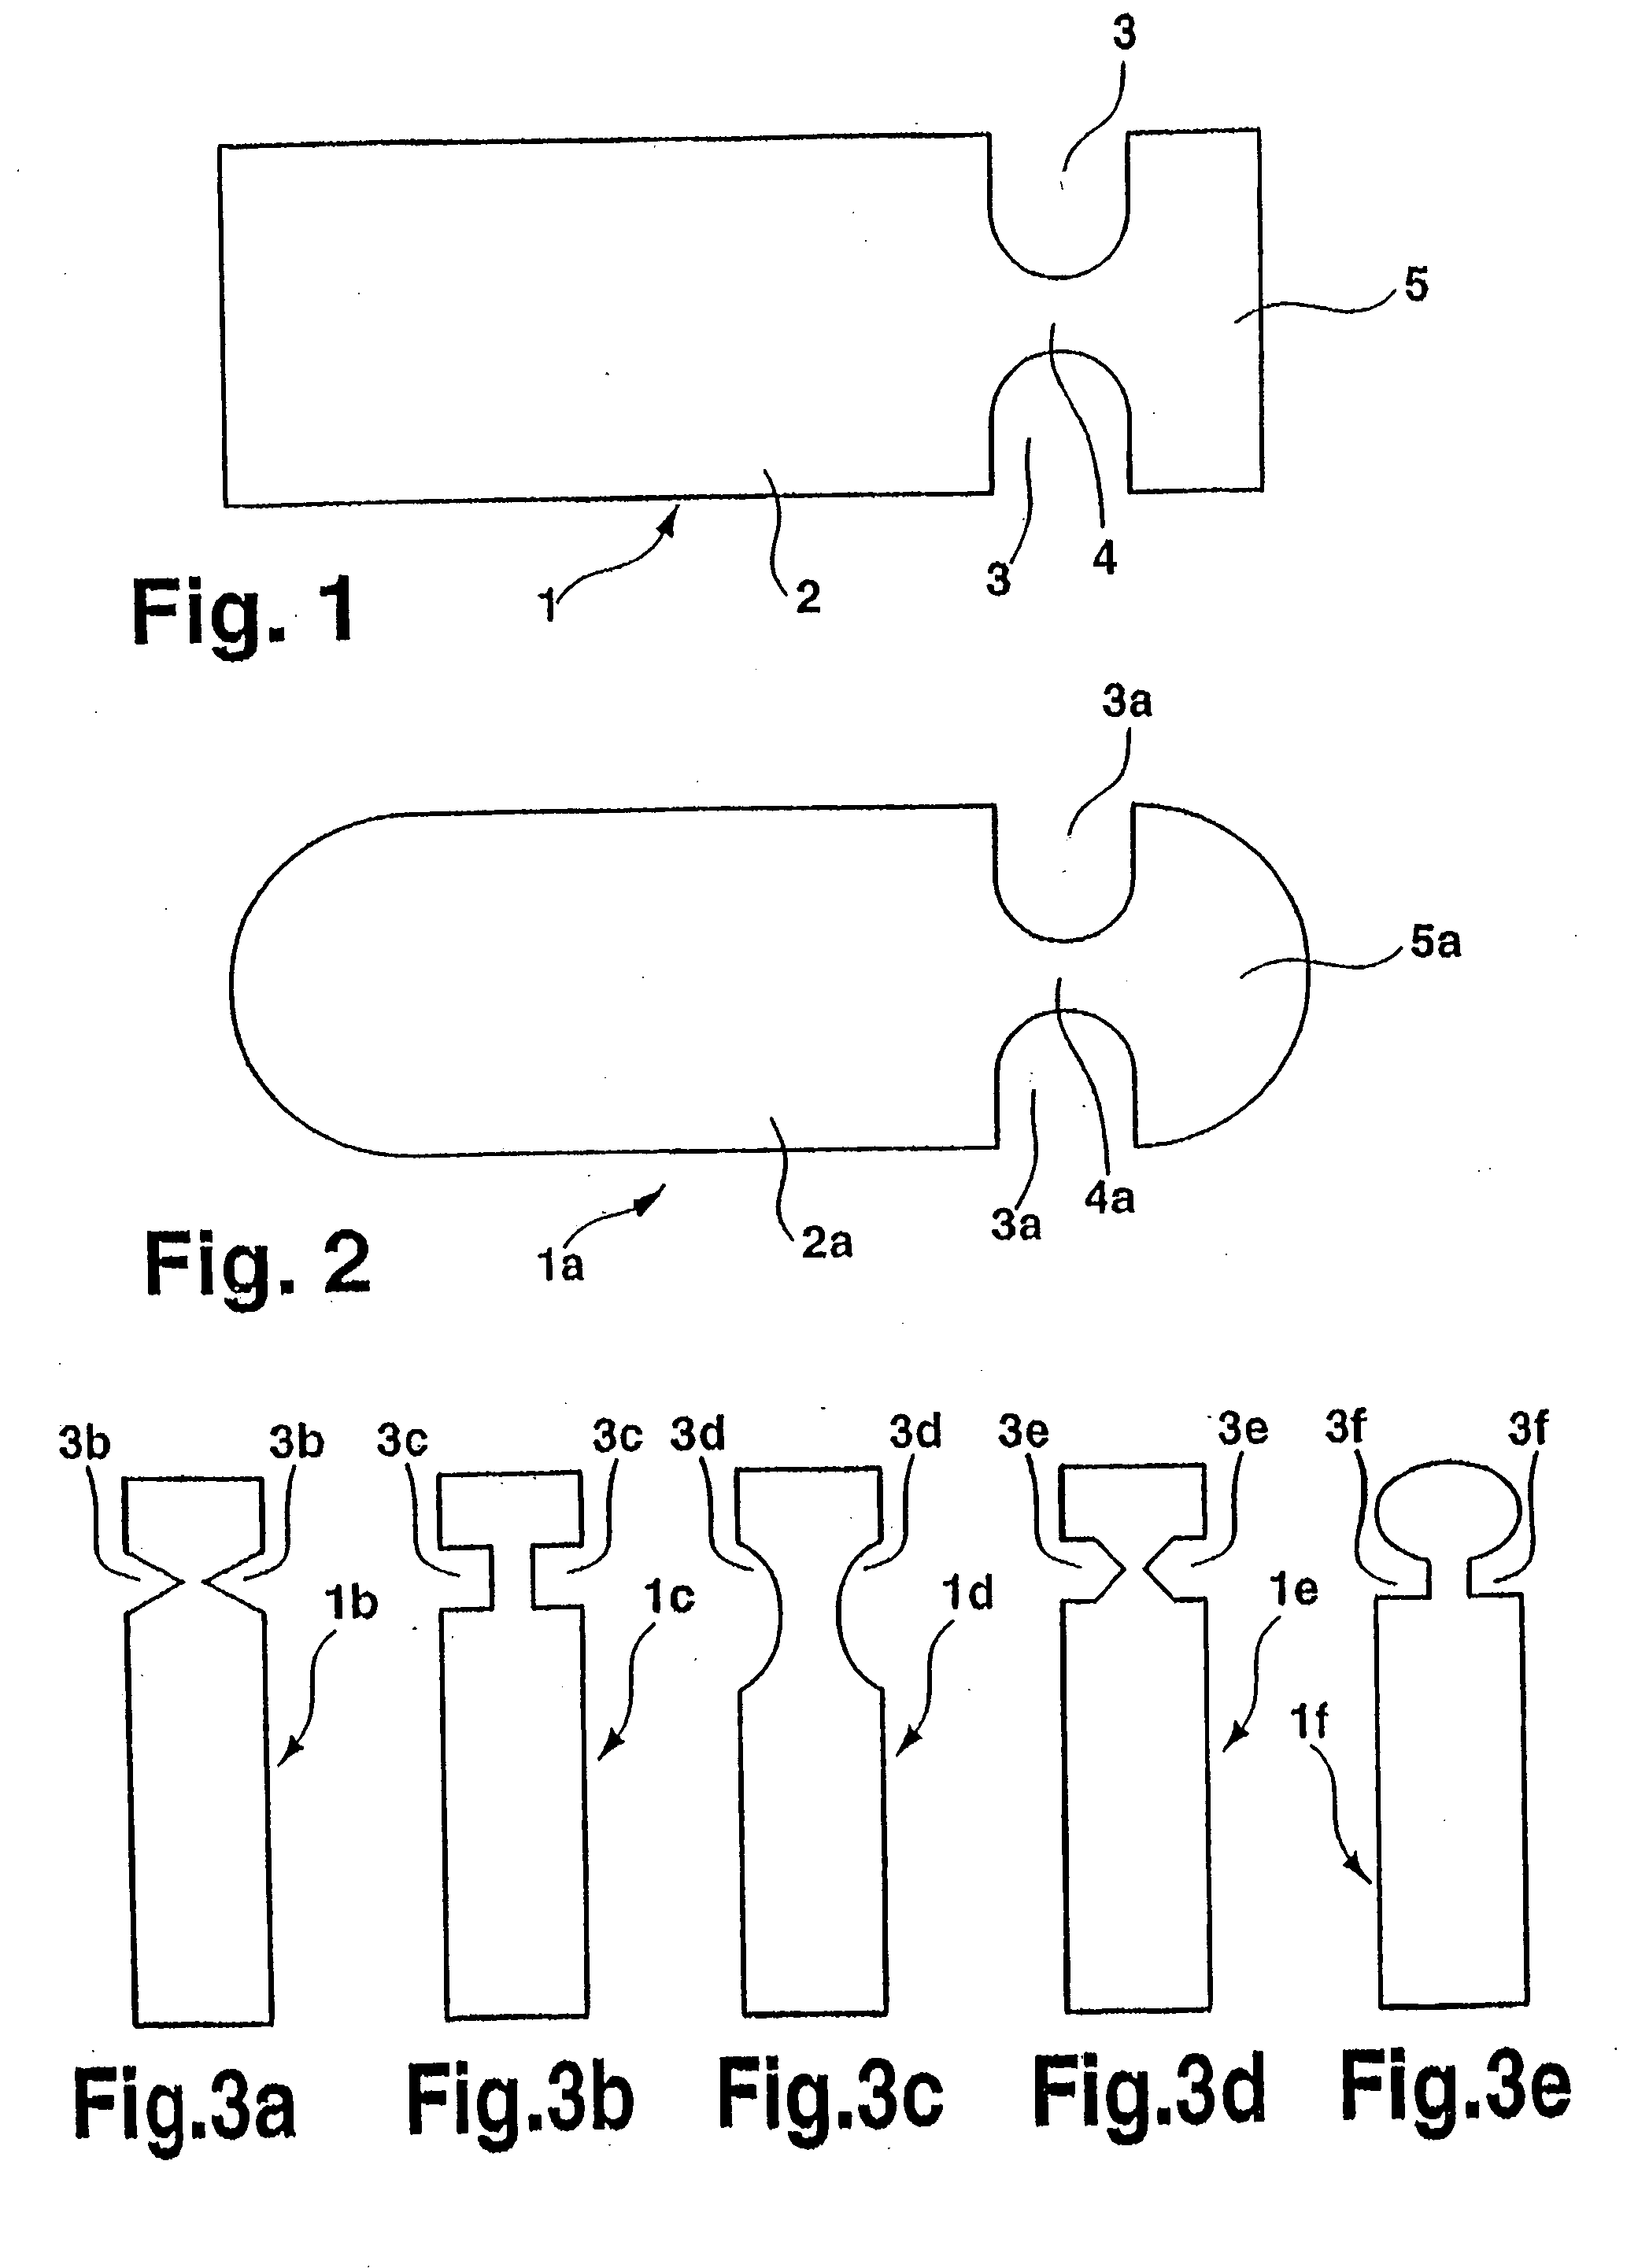 Supporting device for a person's back and head area